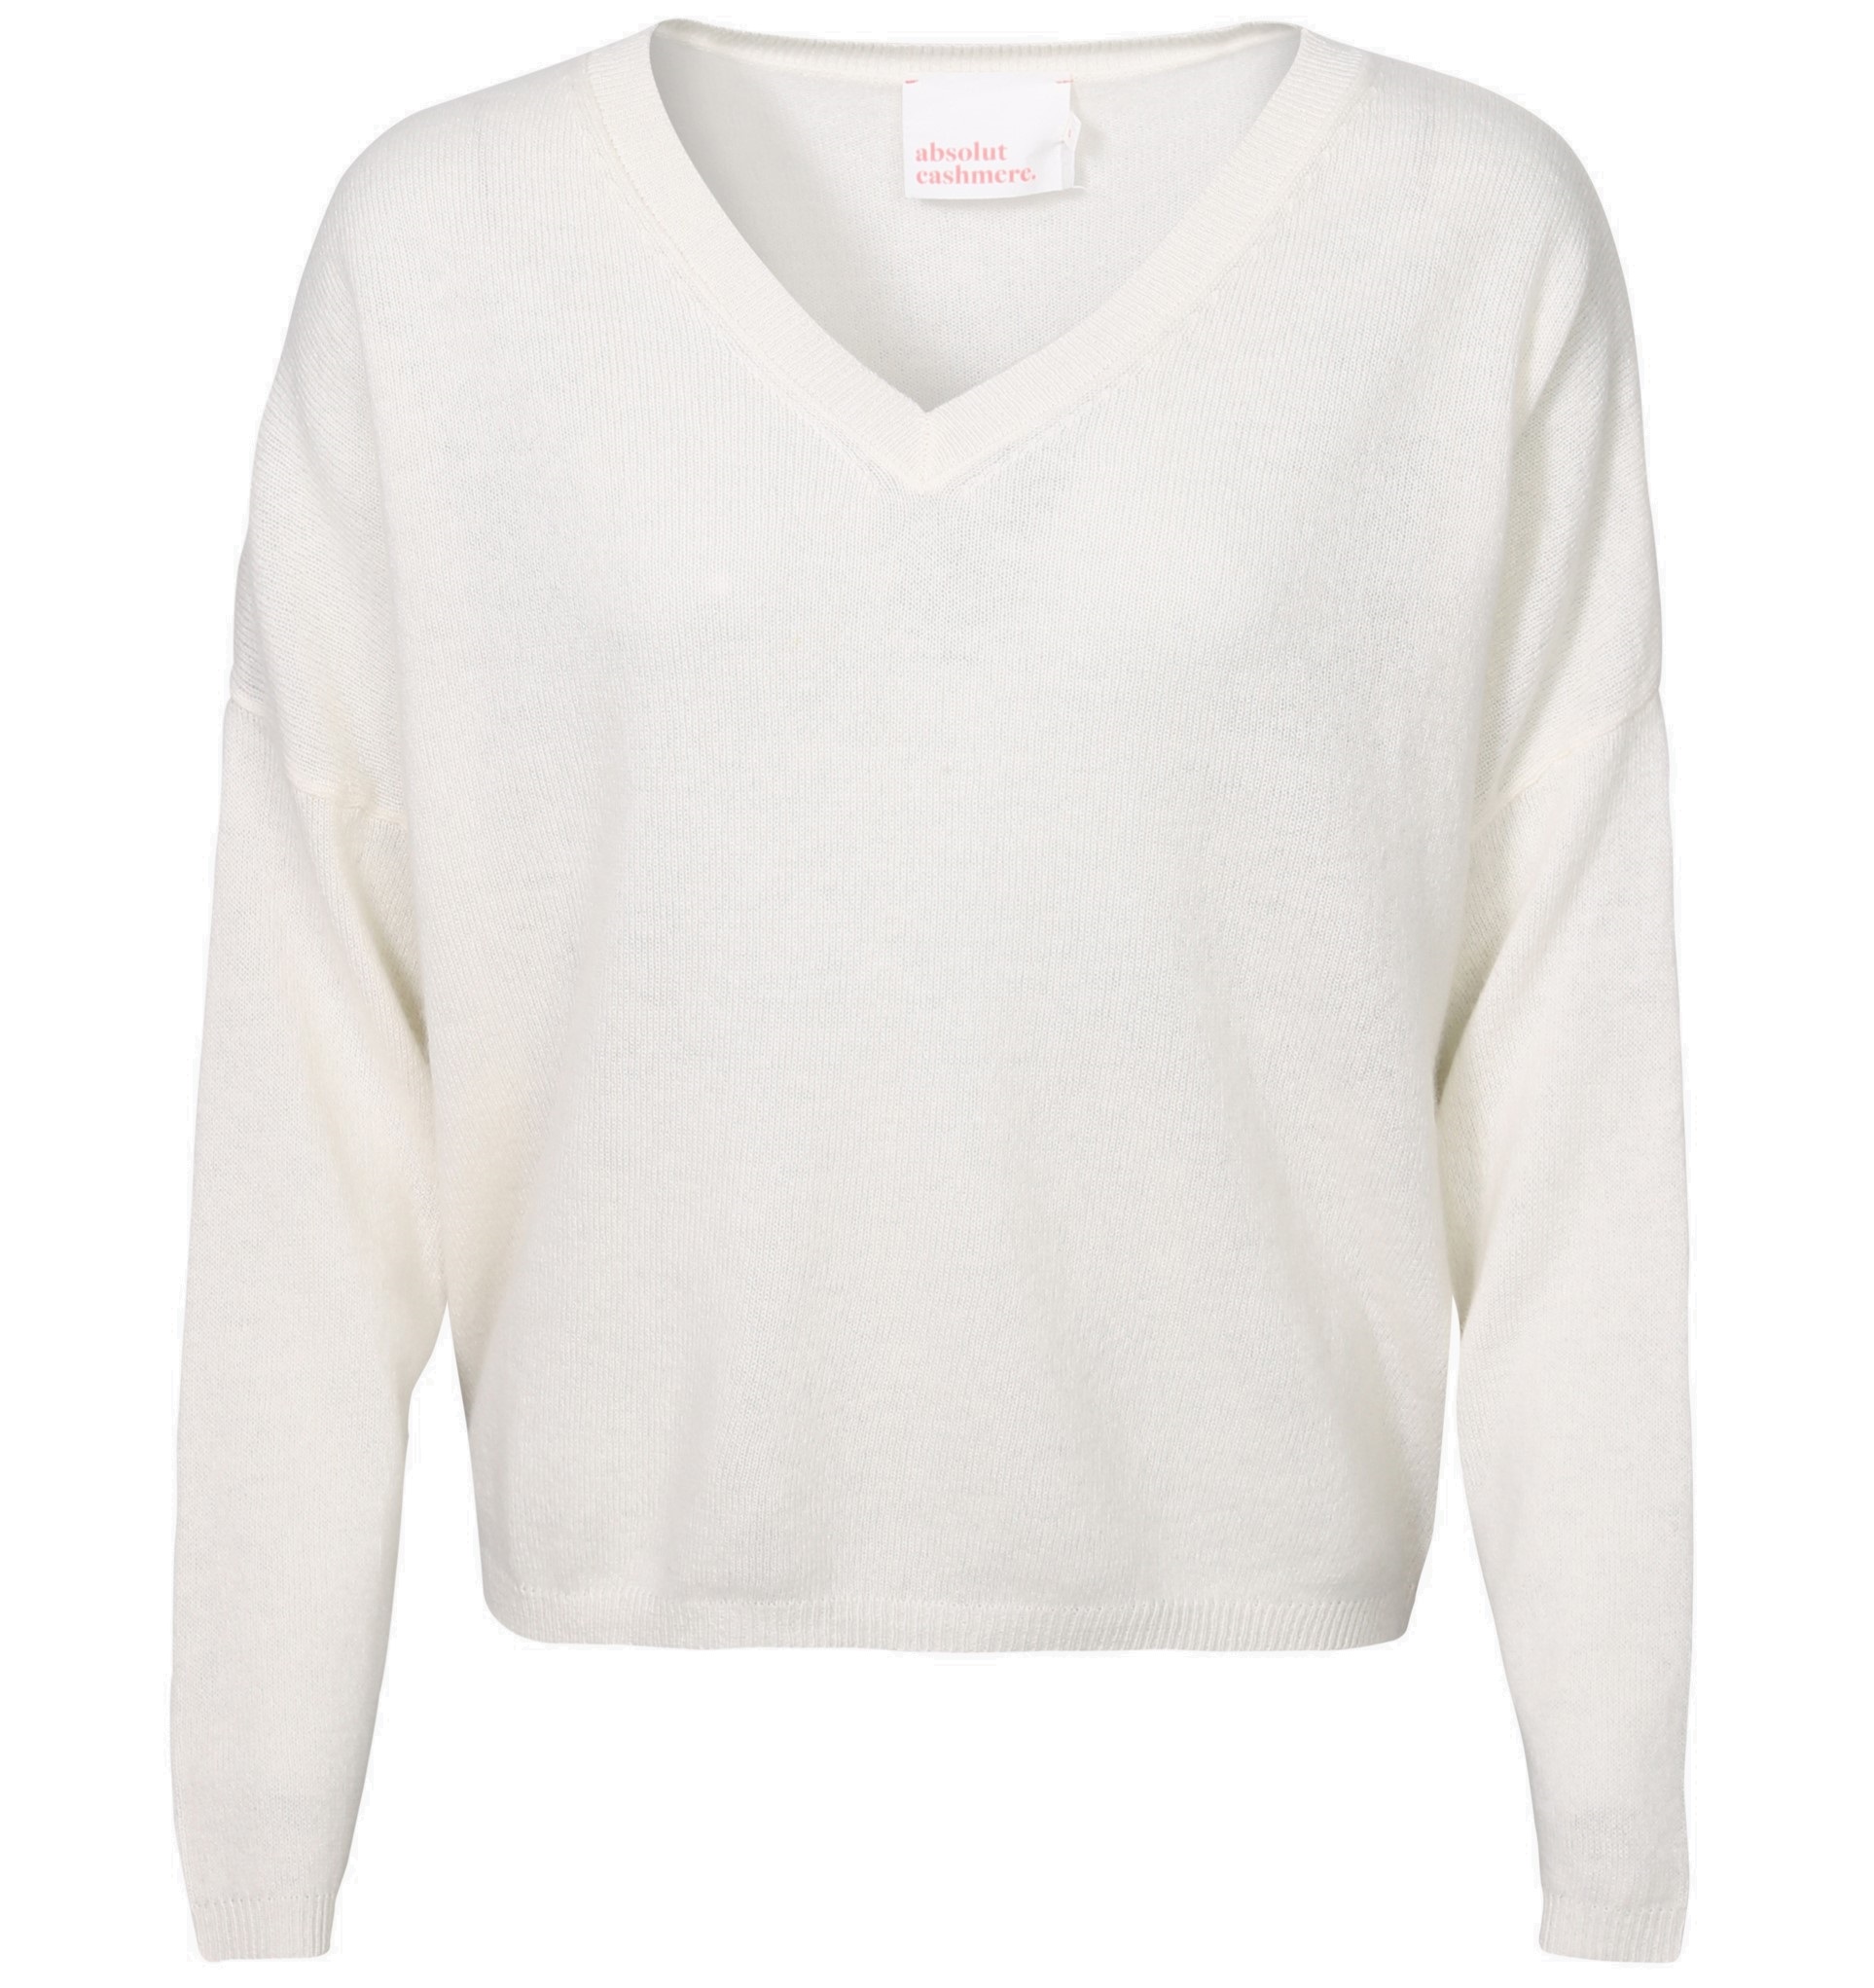 ABSOLUT CASHMERE V-Neck Sweater Alicia in Offwhite L